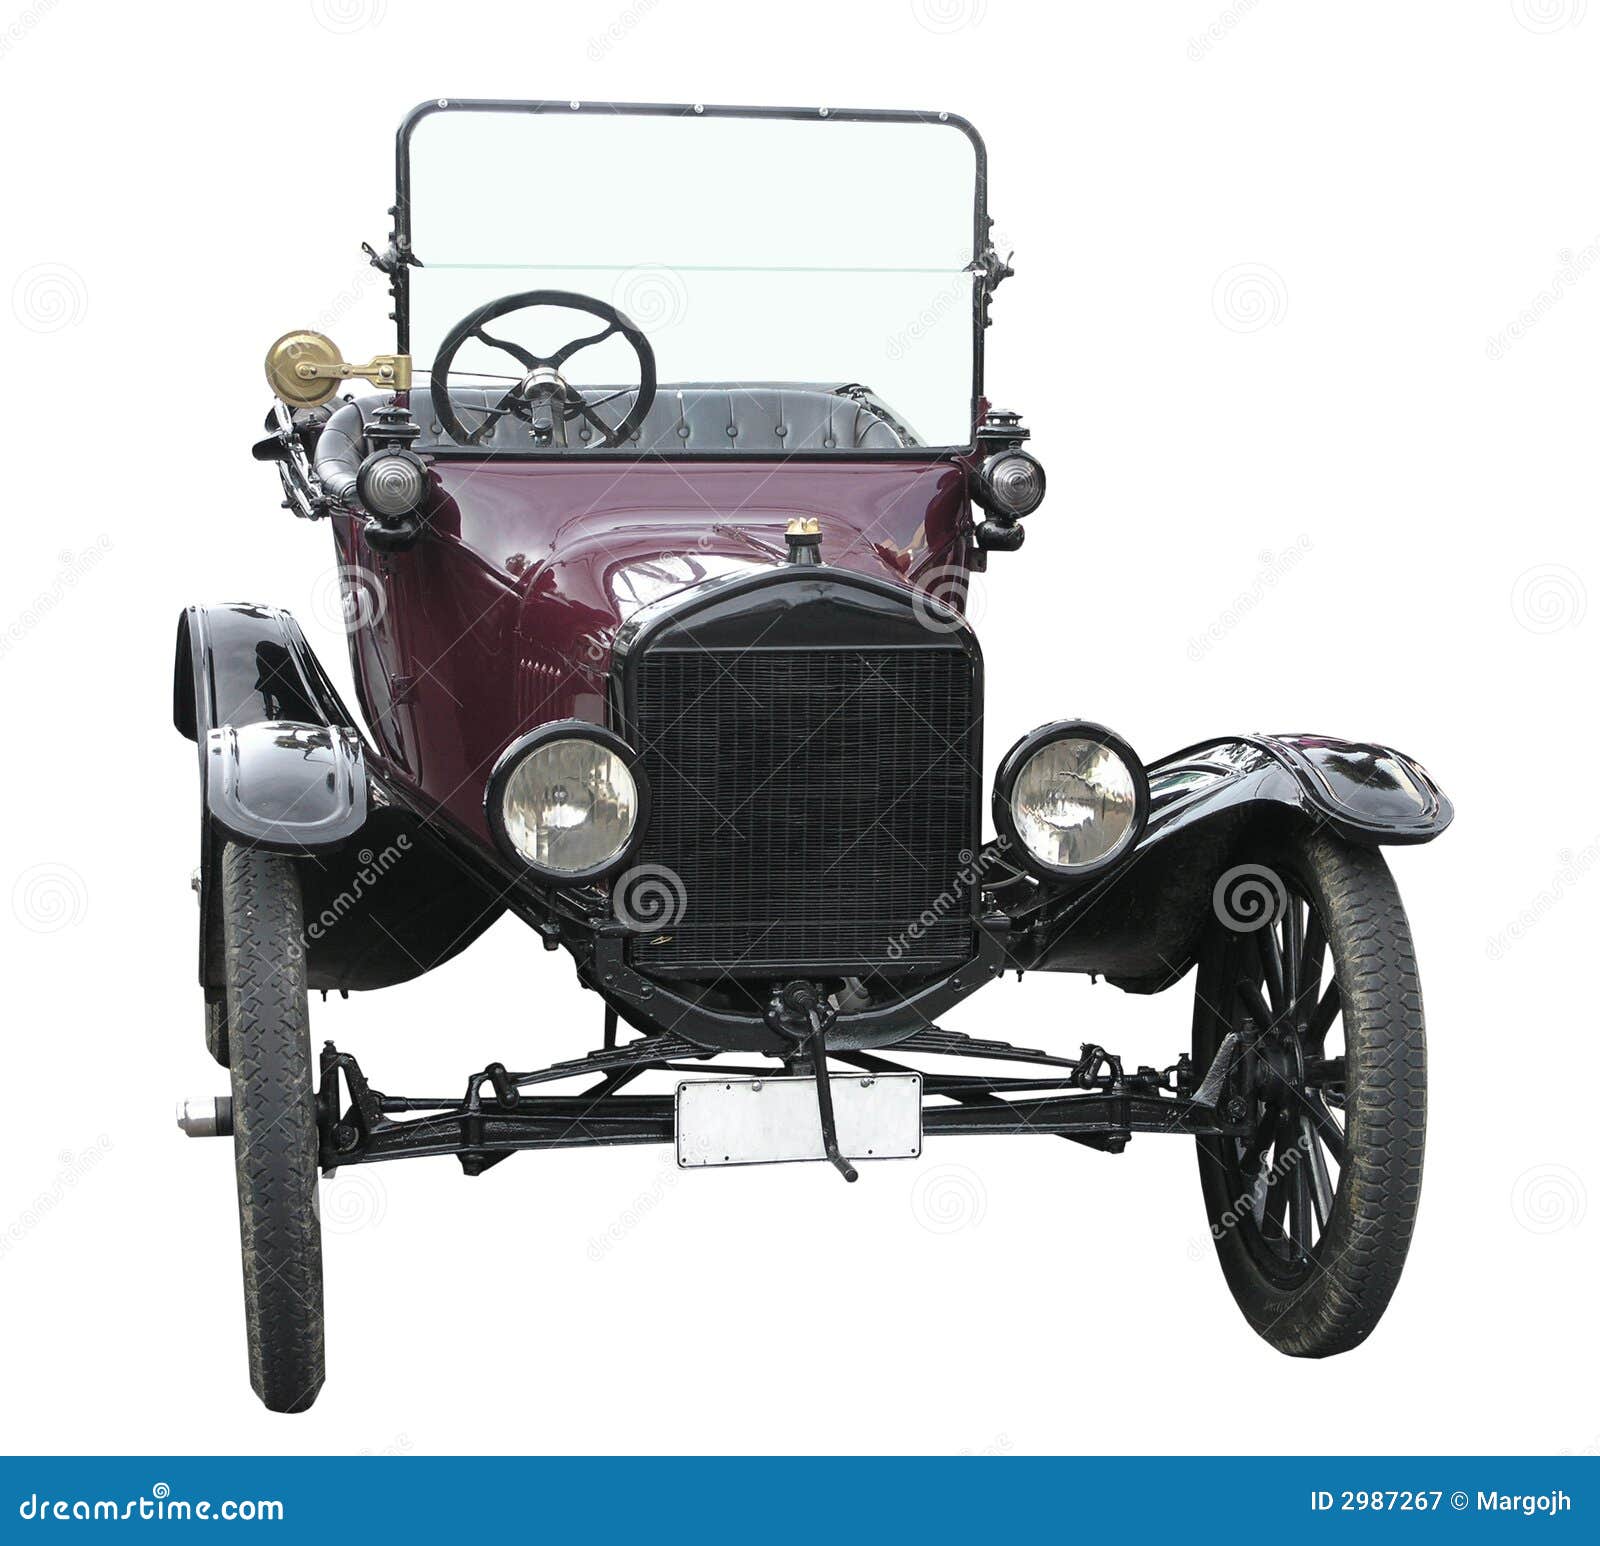 Payment plans for the ford model t #7